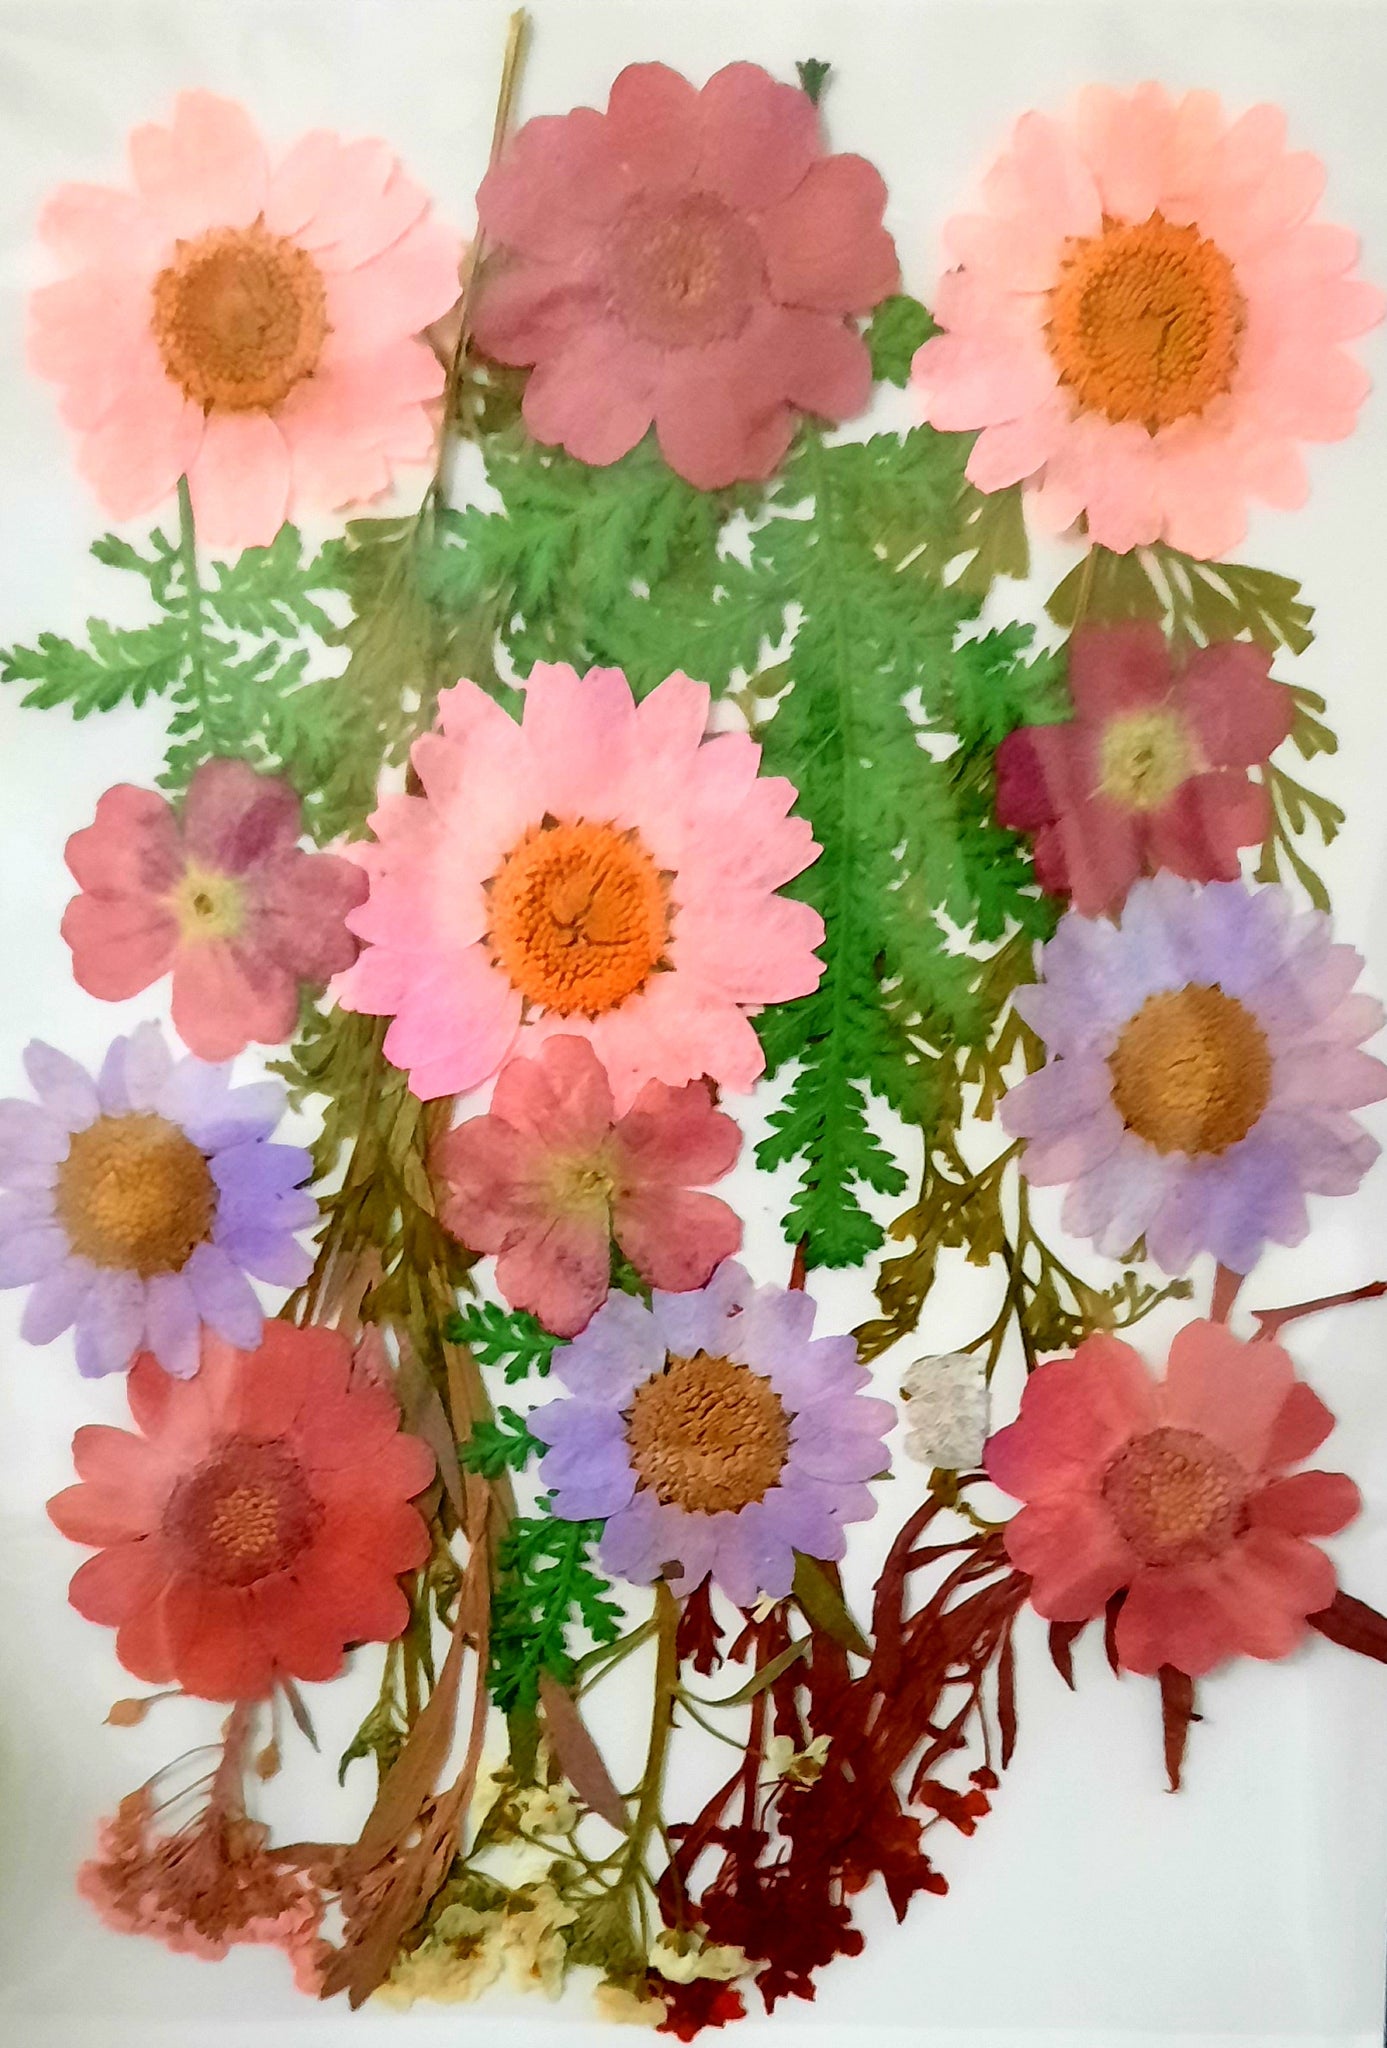 Mixed pressed flowers